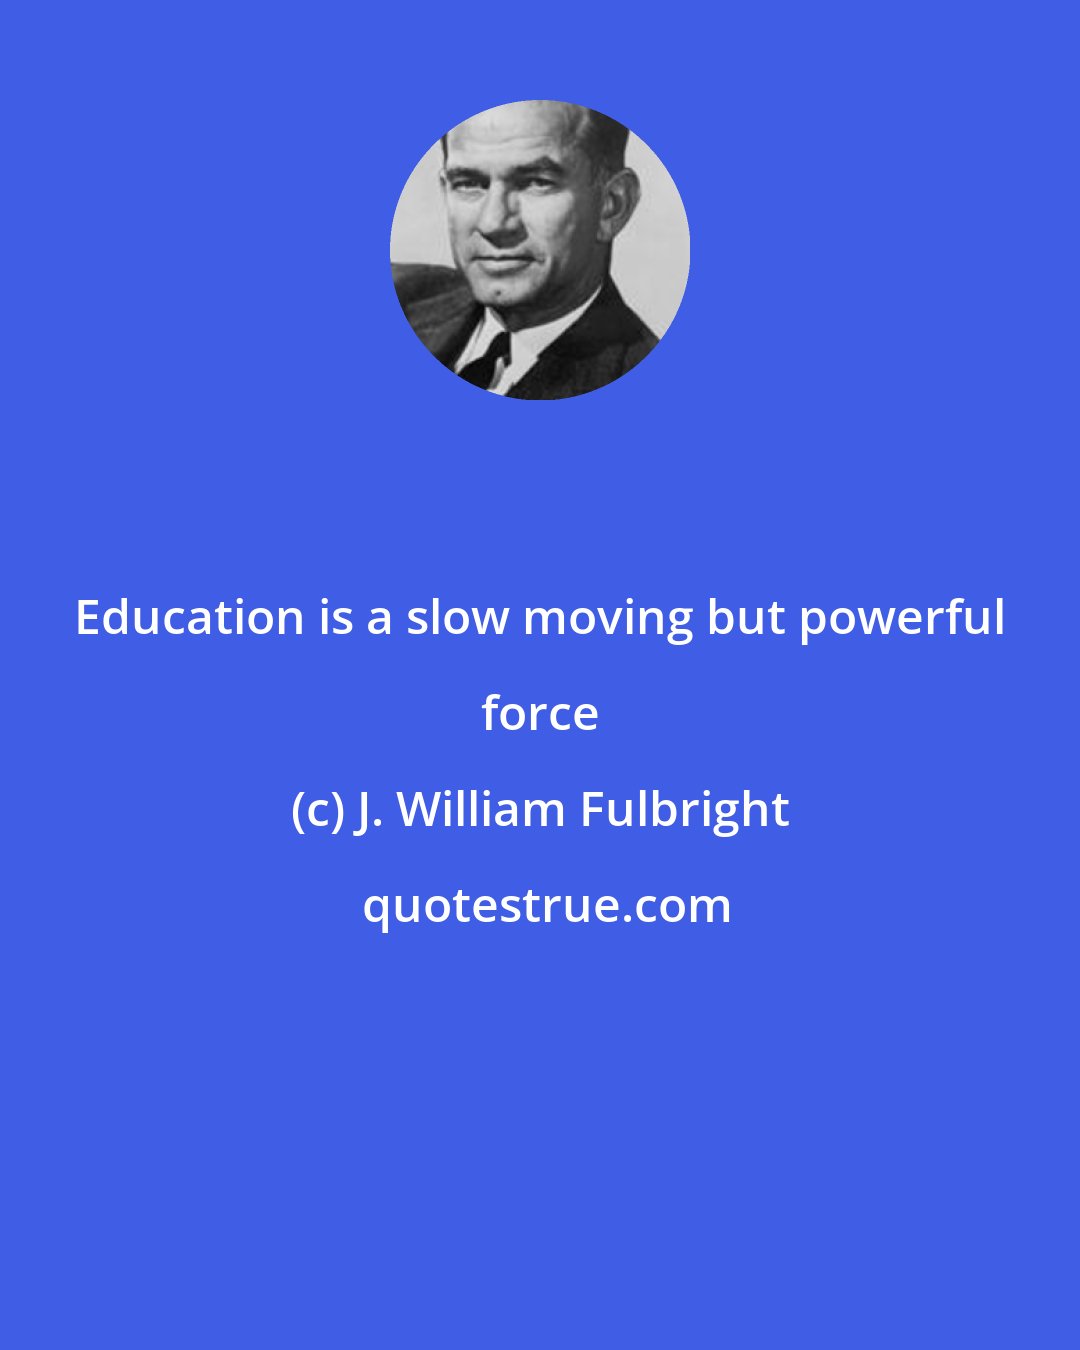 J. William Fulbright: Education is a slow moving but powerful force